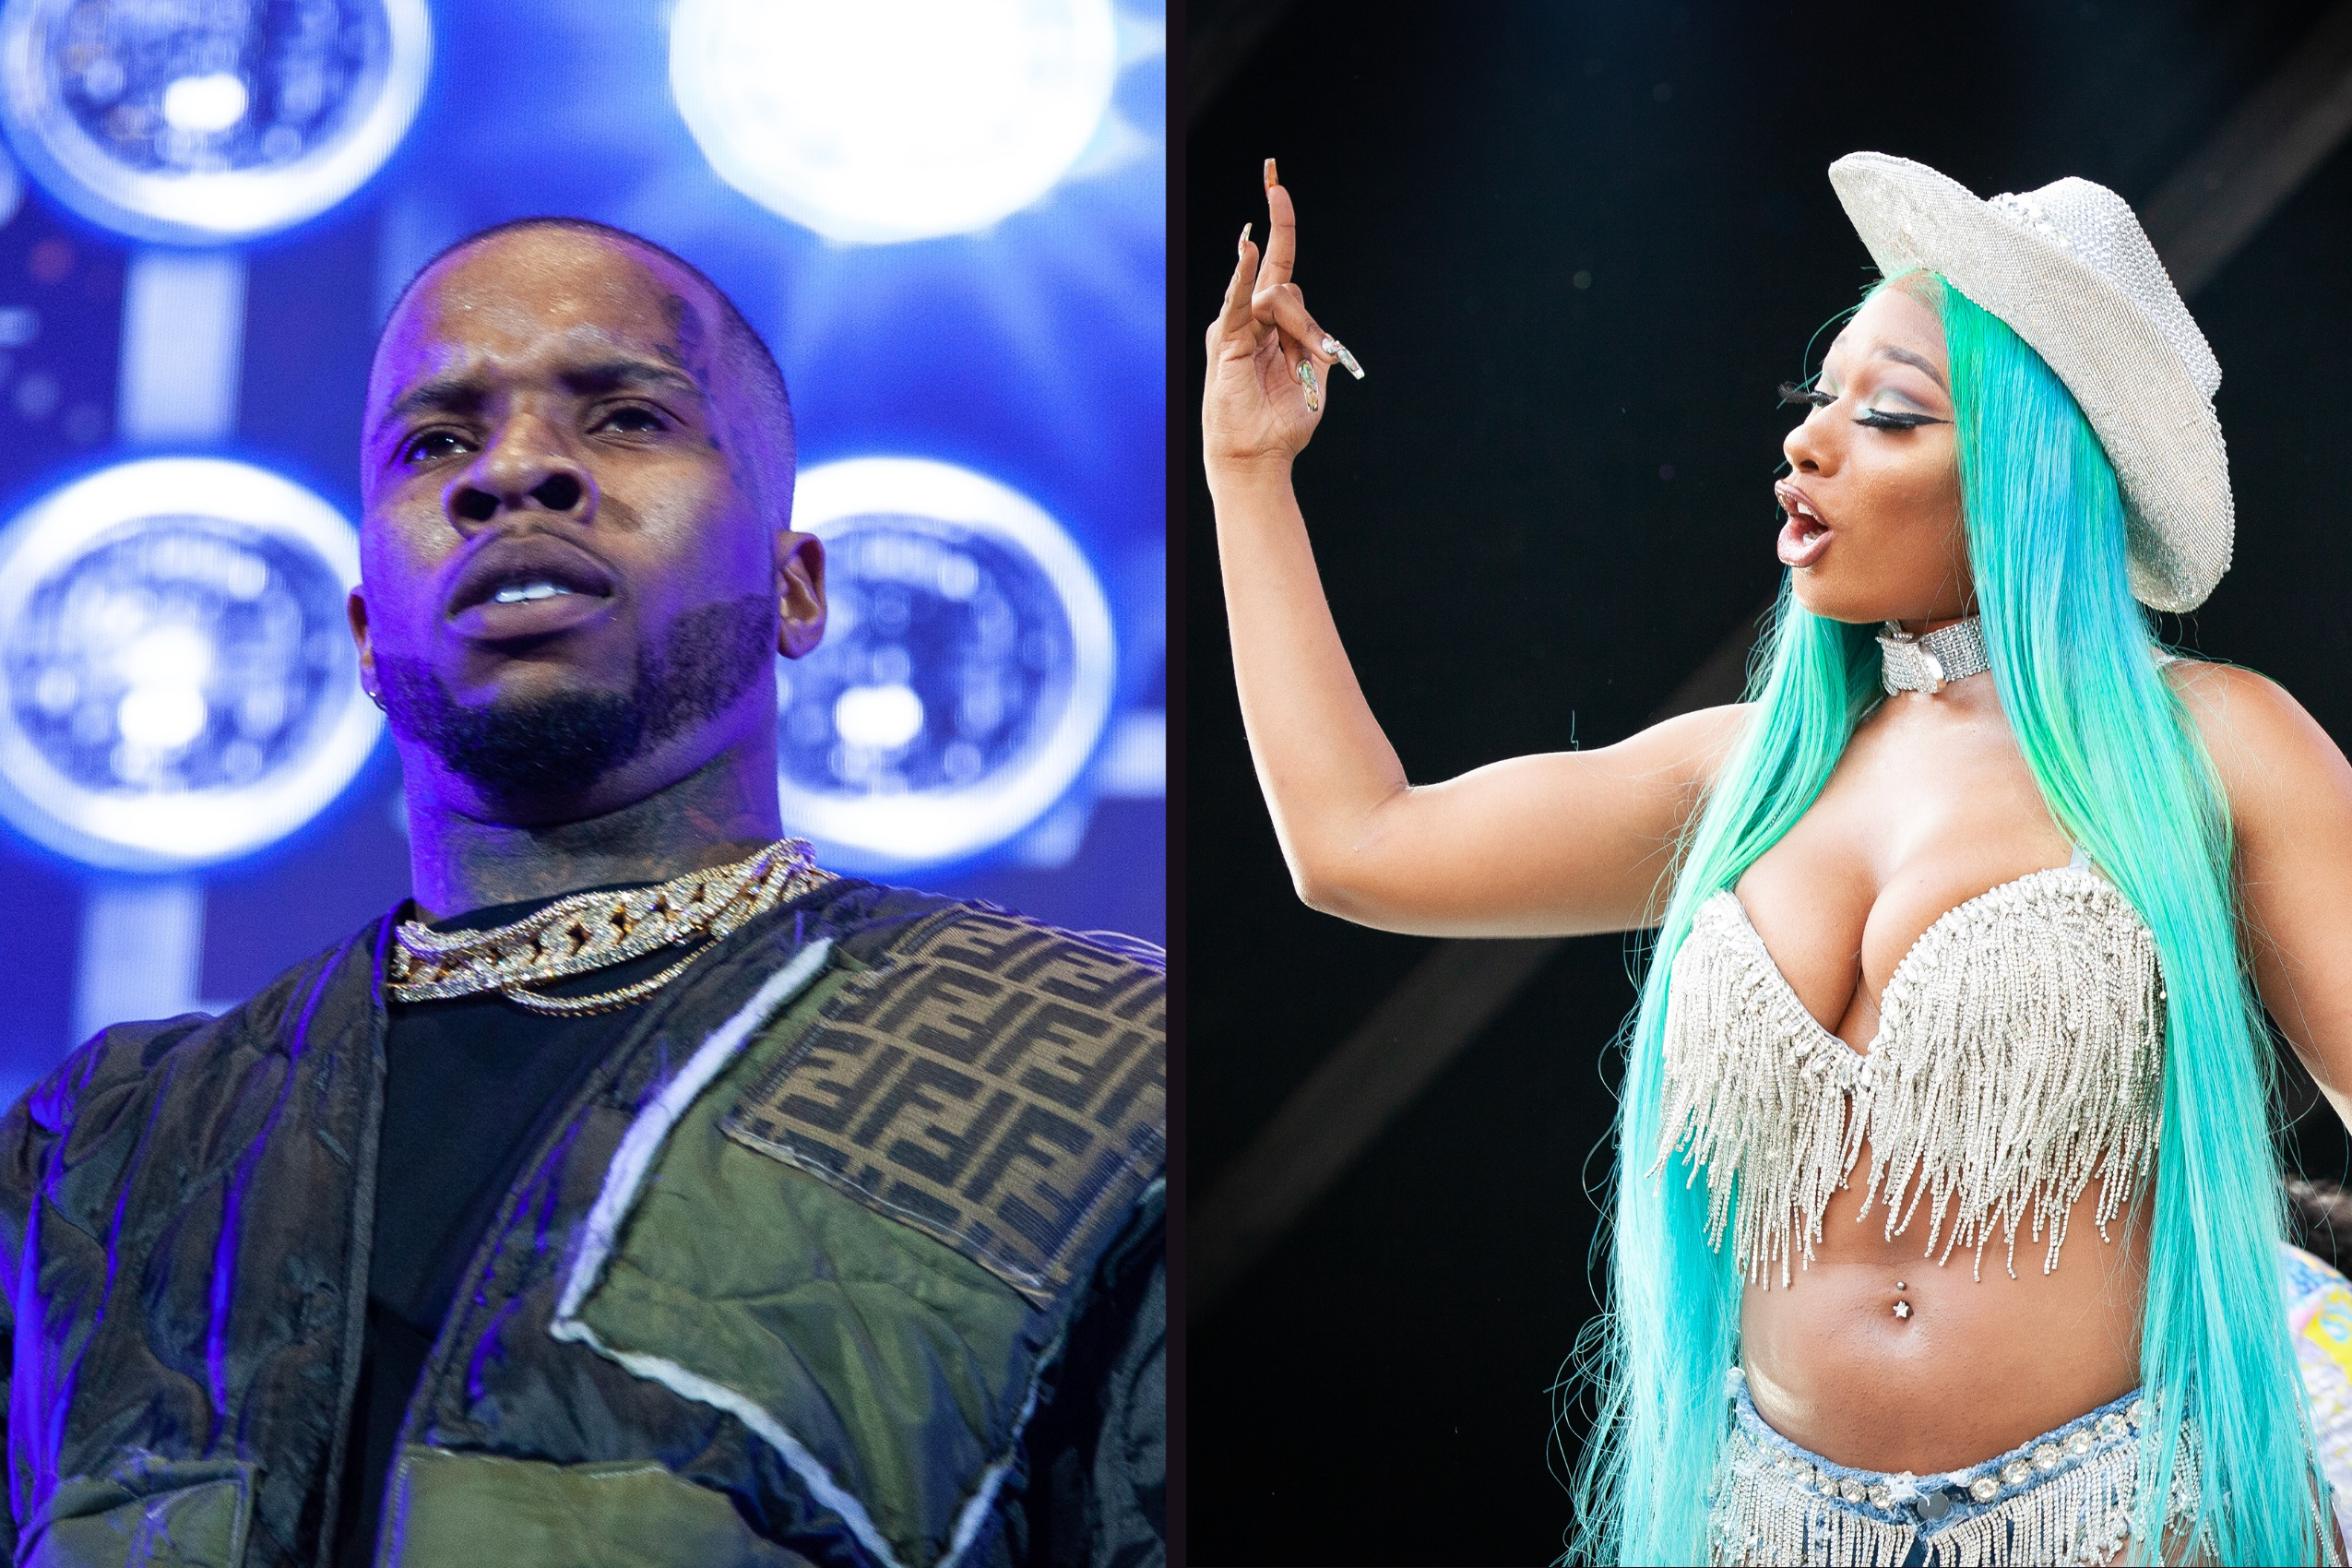 Megan Thee Stallion's Bodyguard Not Declared Missing By LAPD